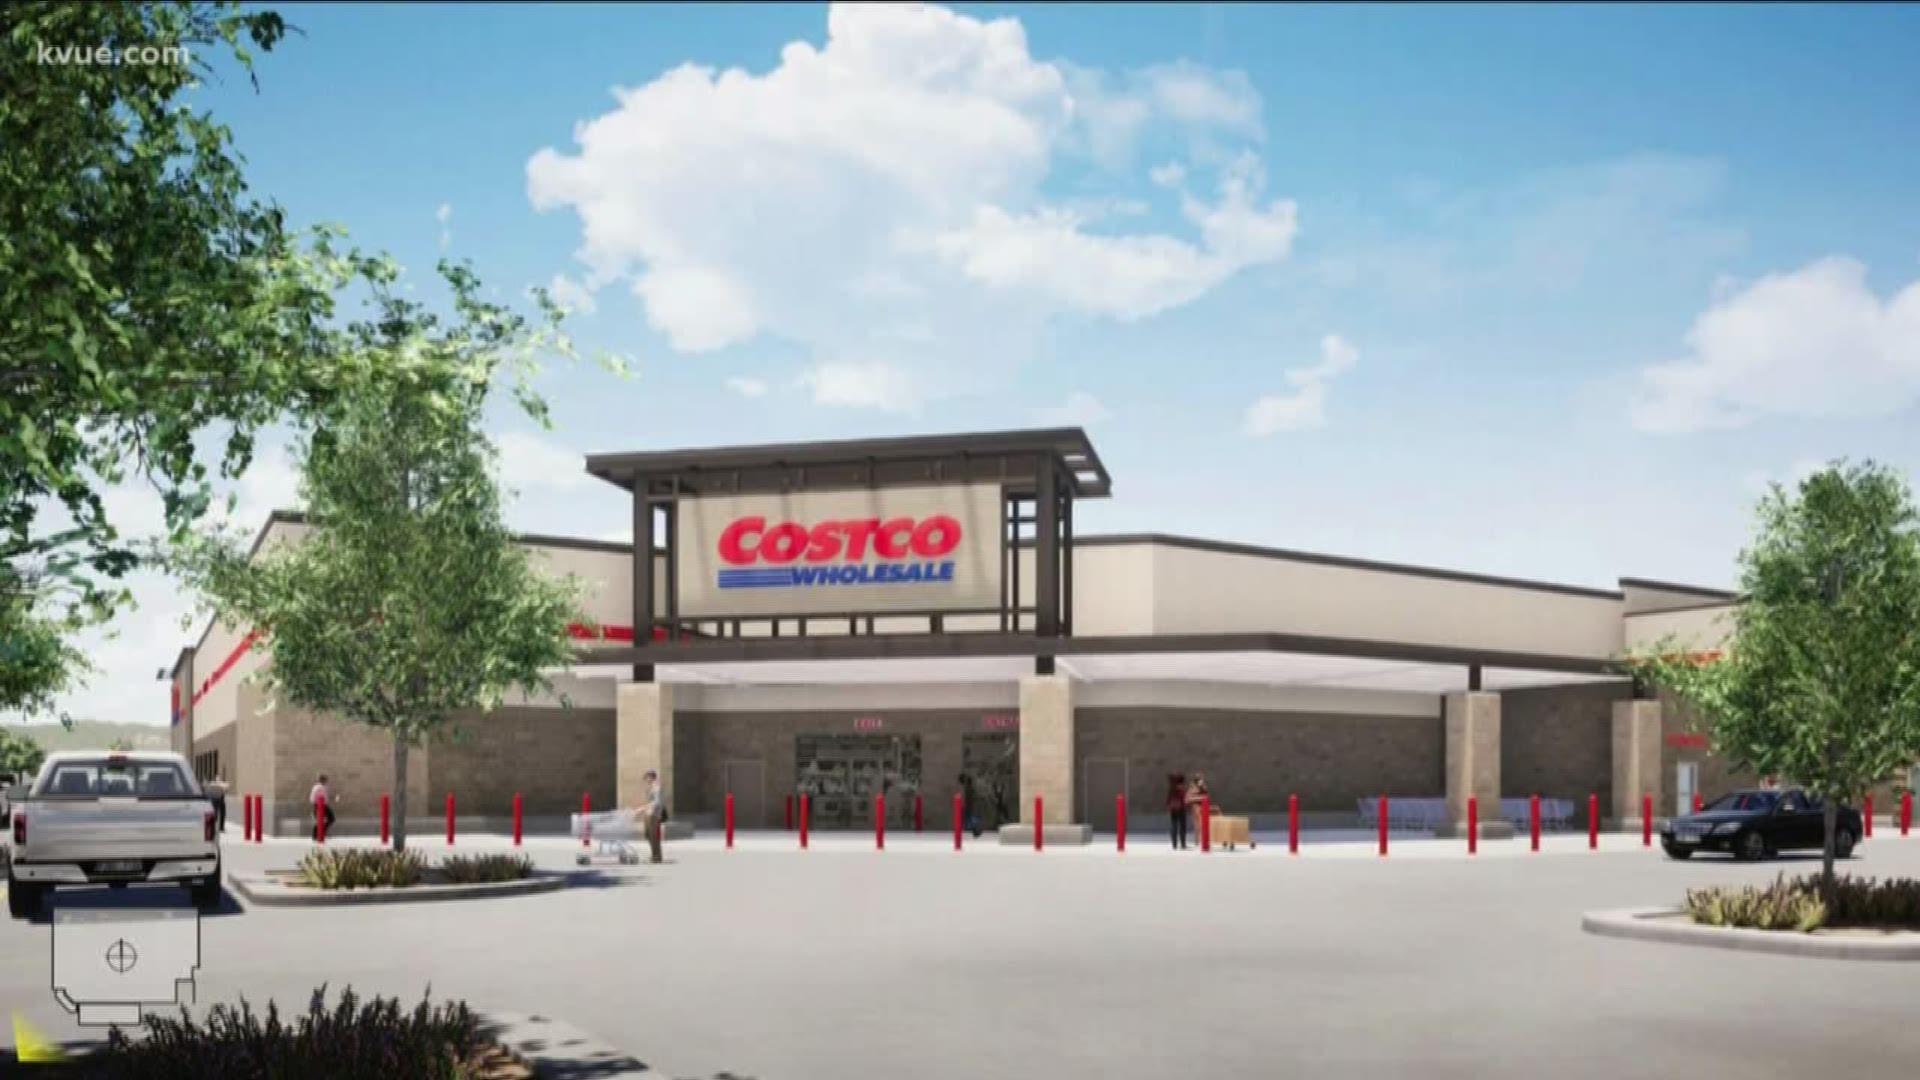 Costco is coming to Georgetown!